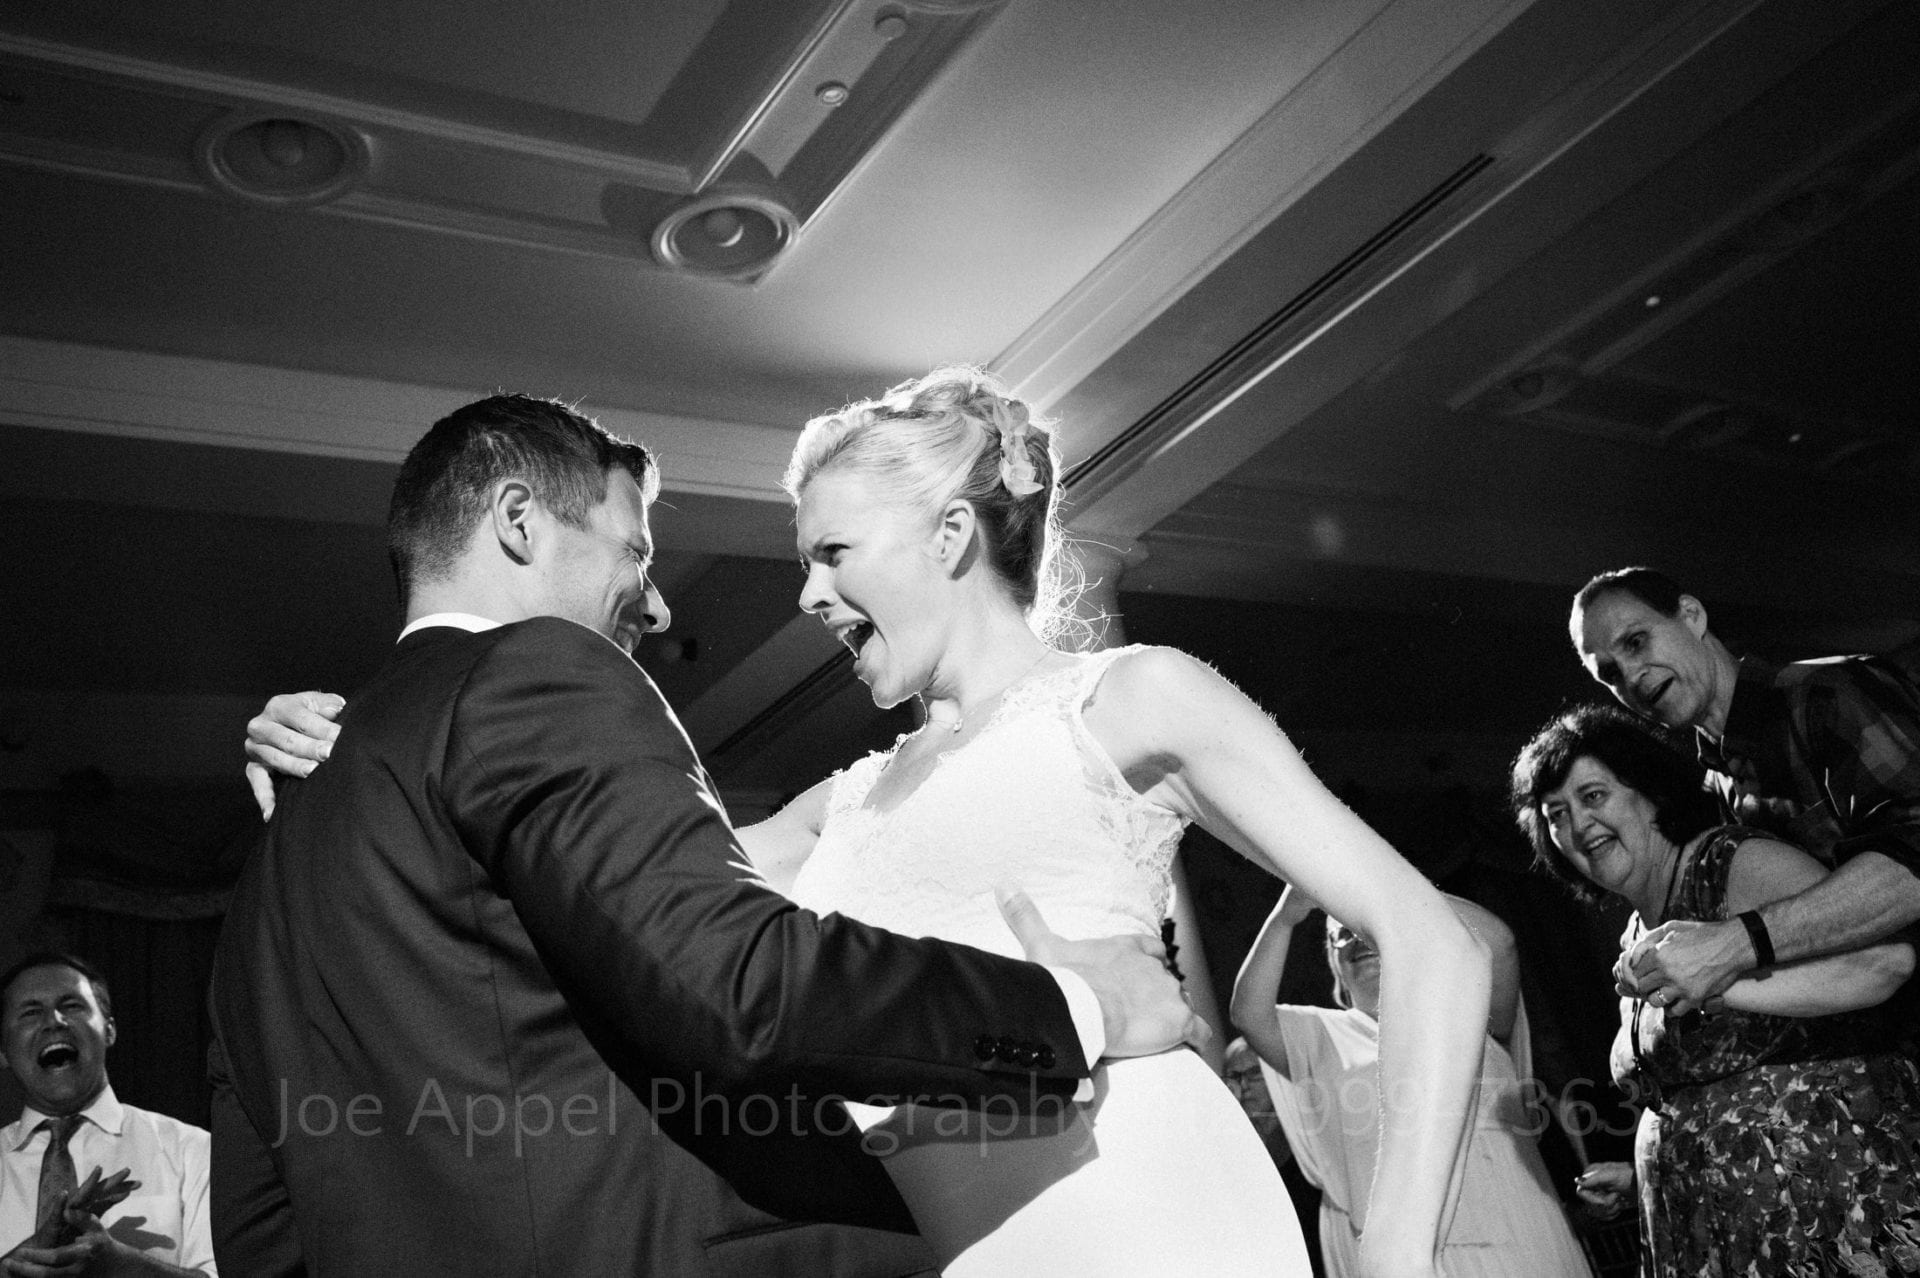 A bride yells out as she dances with her arm around the shoulder of her groom who has his hand on her waist during their Omni Bedford Springs Resort Wedding. Guests smile and laugh as they watch.